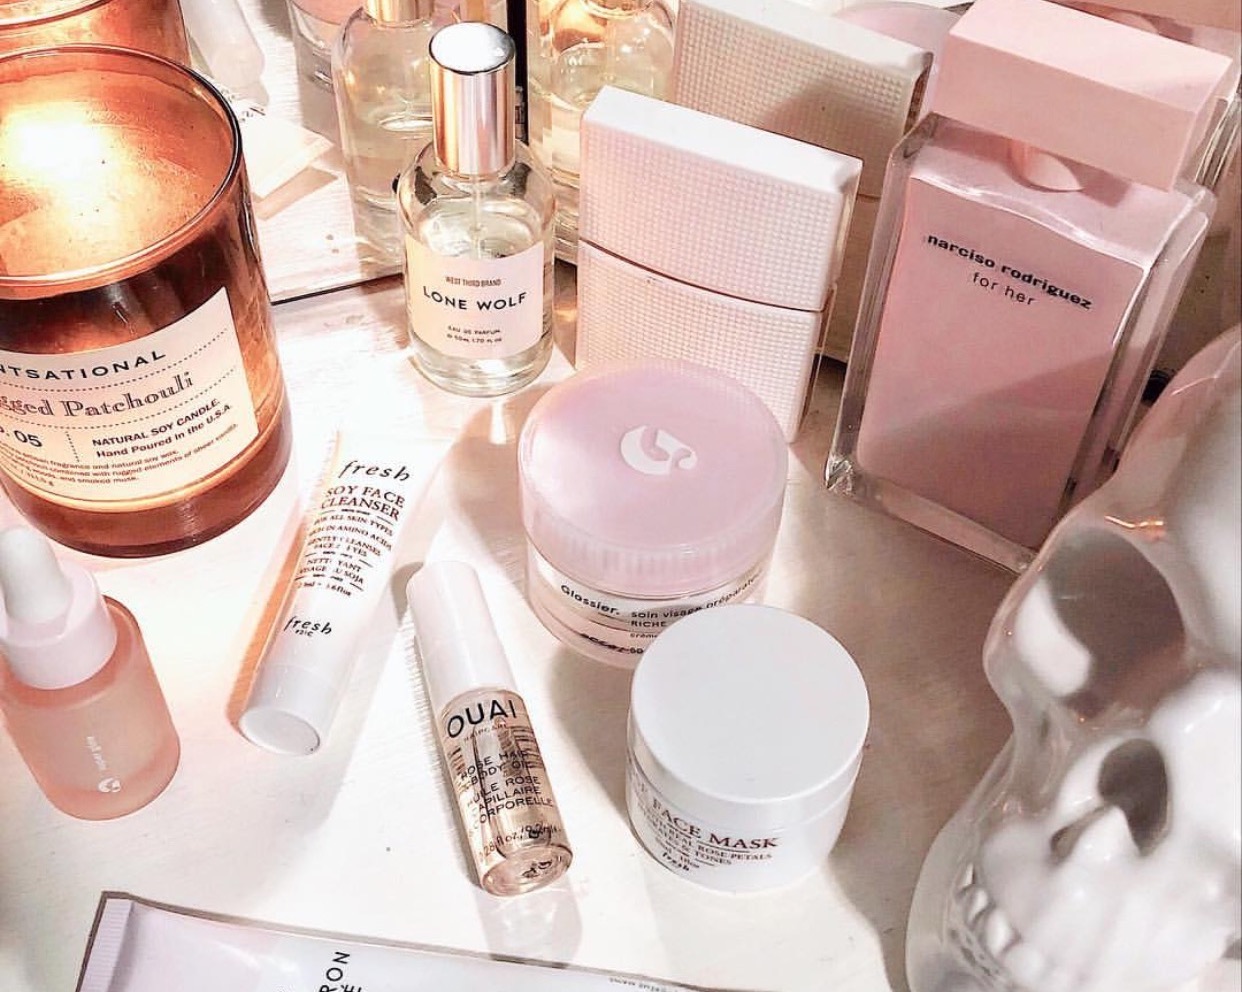 The 20 Skincare Products Our Readers Swear By - The Newsette